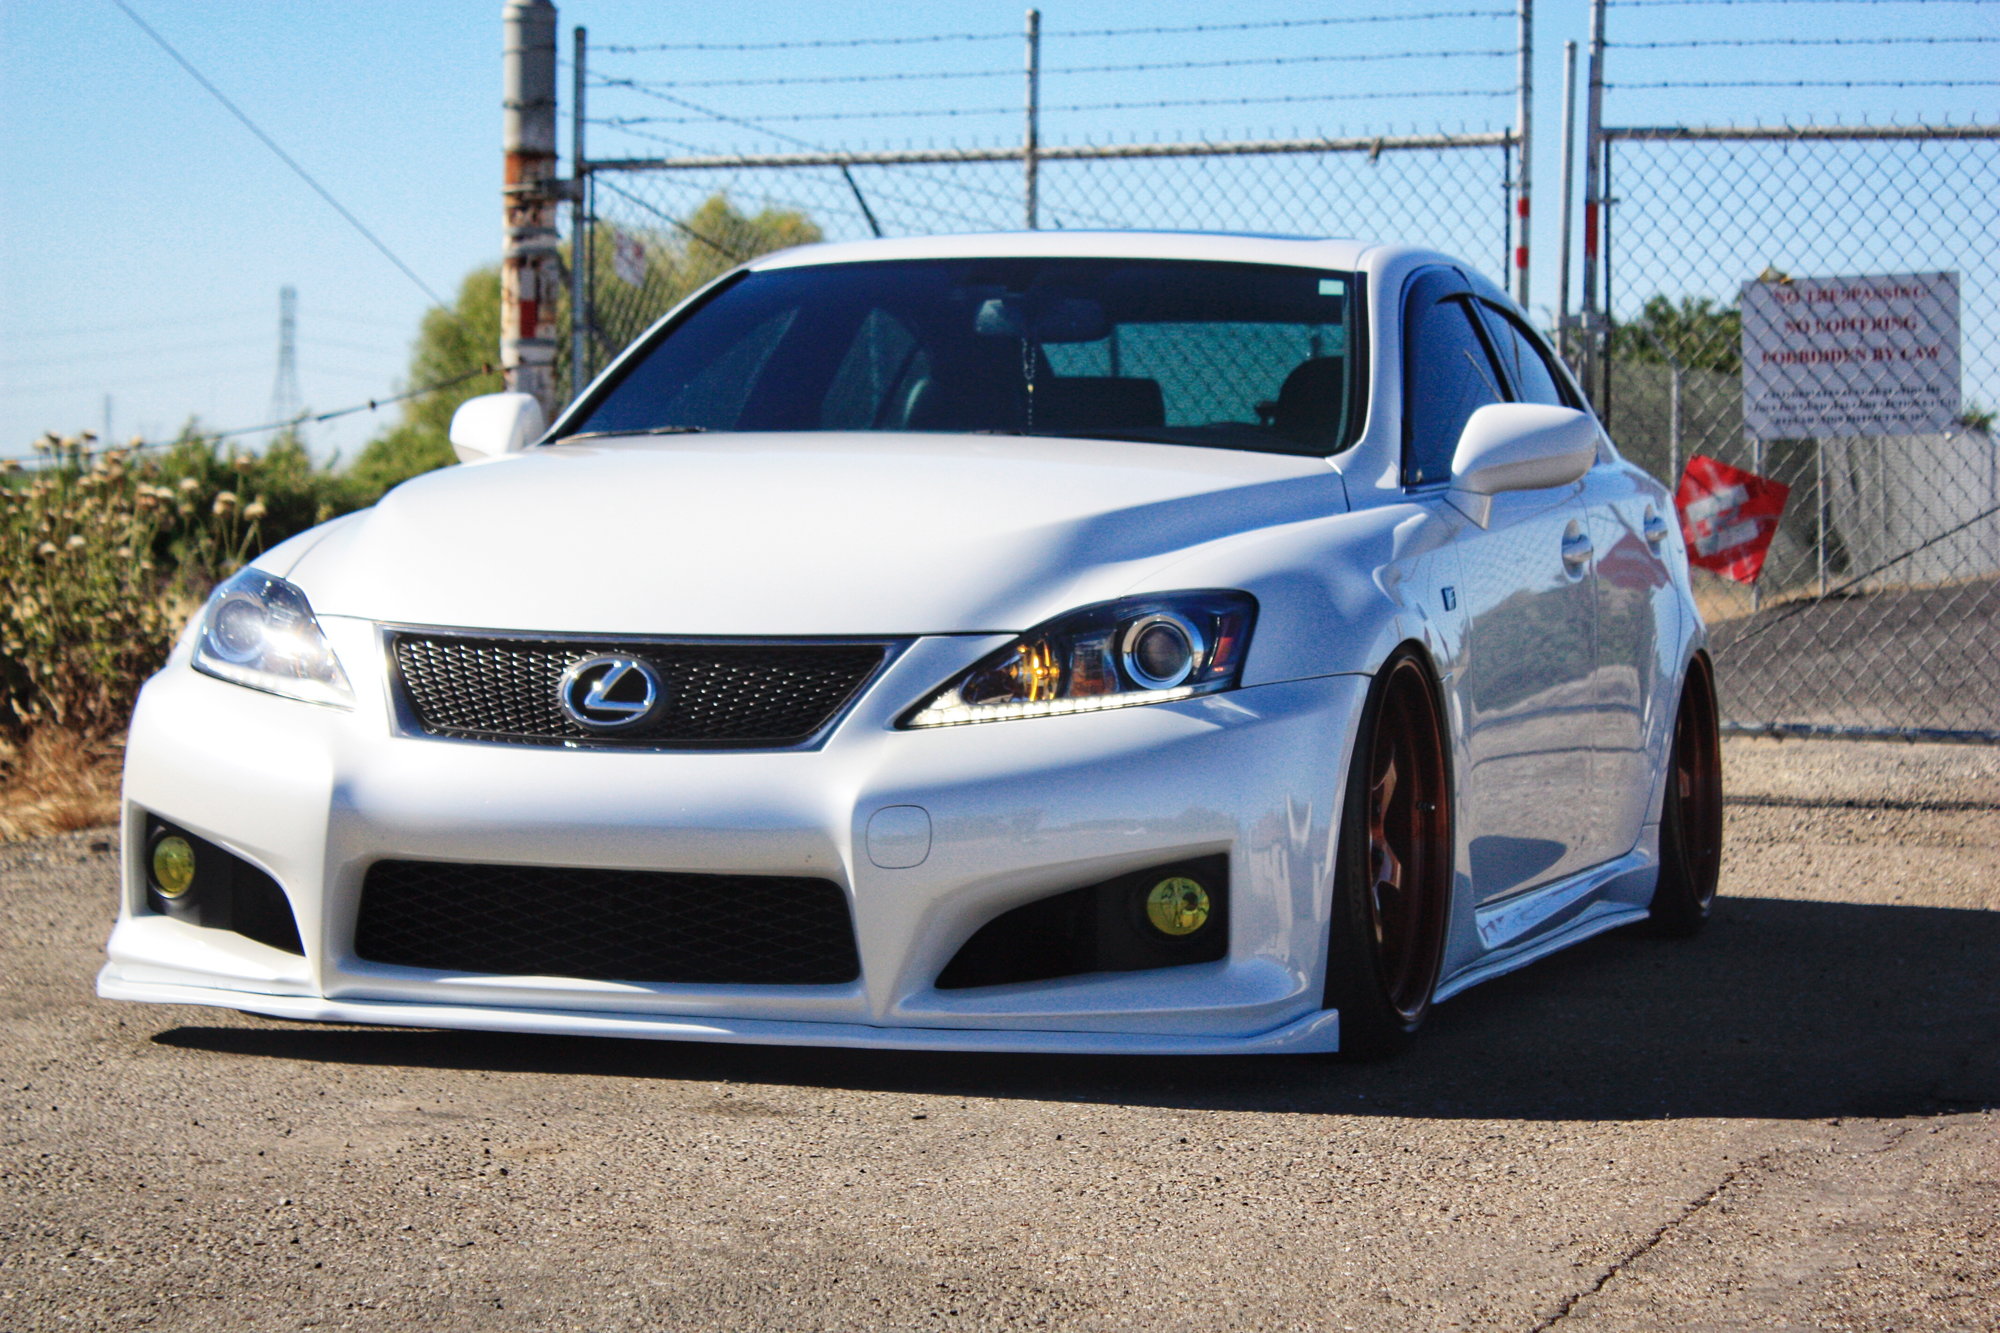 2010 Lexus IS F - 2010 Lexus IS-F Modded, NorCal. - Used - VIN JTHBP5C20A5006981 - 69,100 Miles - 8 cyl - 2WD - Automatic - Sedan - White - Stockton, CA 95219, United States